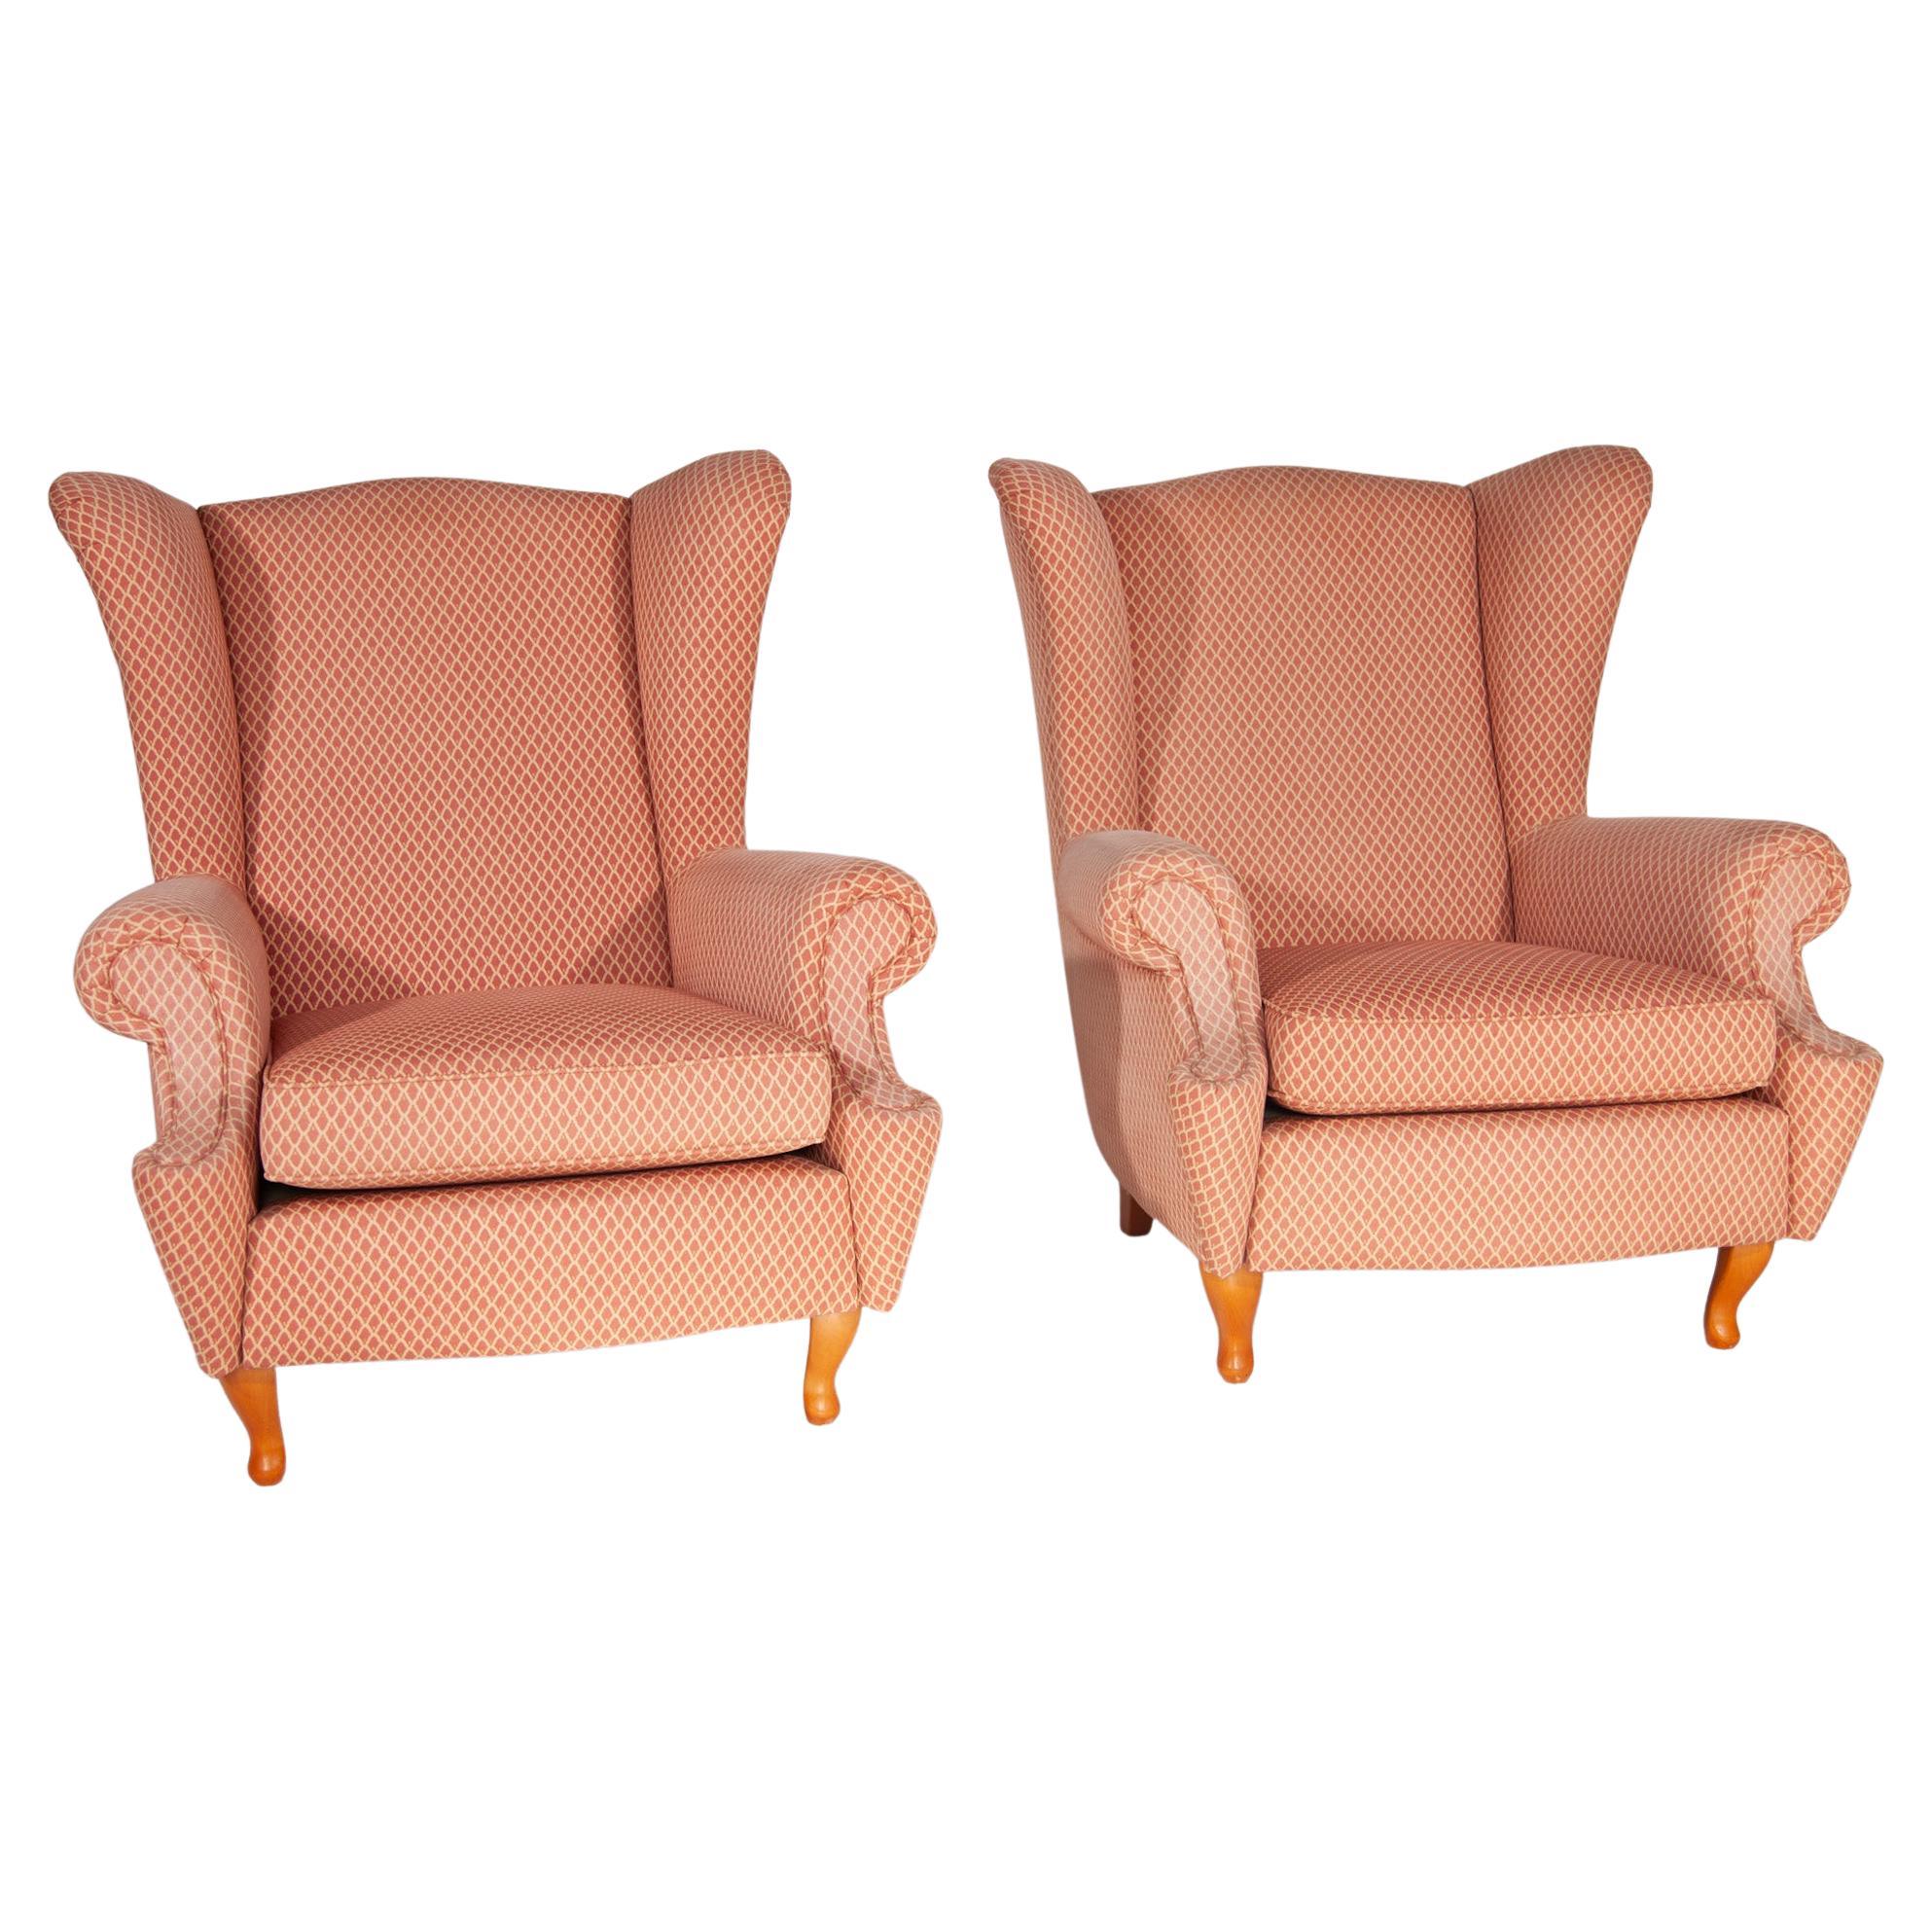 Set of 2 Lounge Wingback Chairs attributed to ISA Bergamo